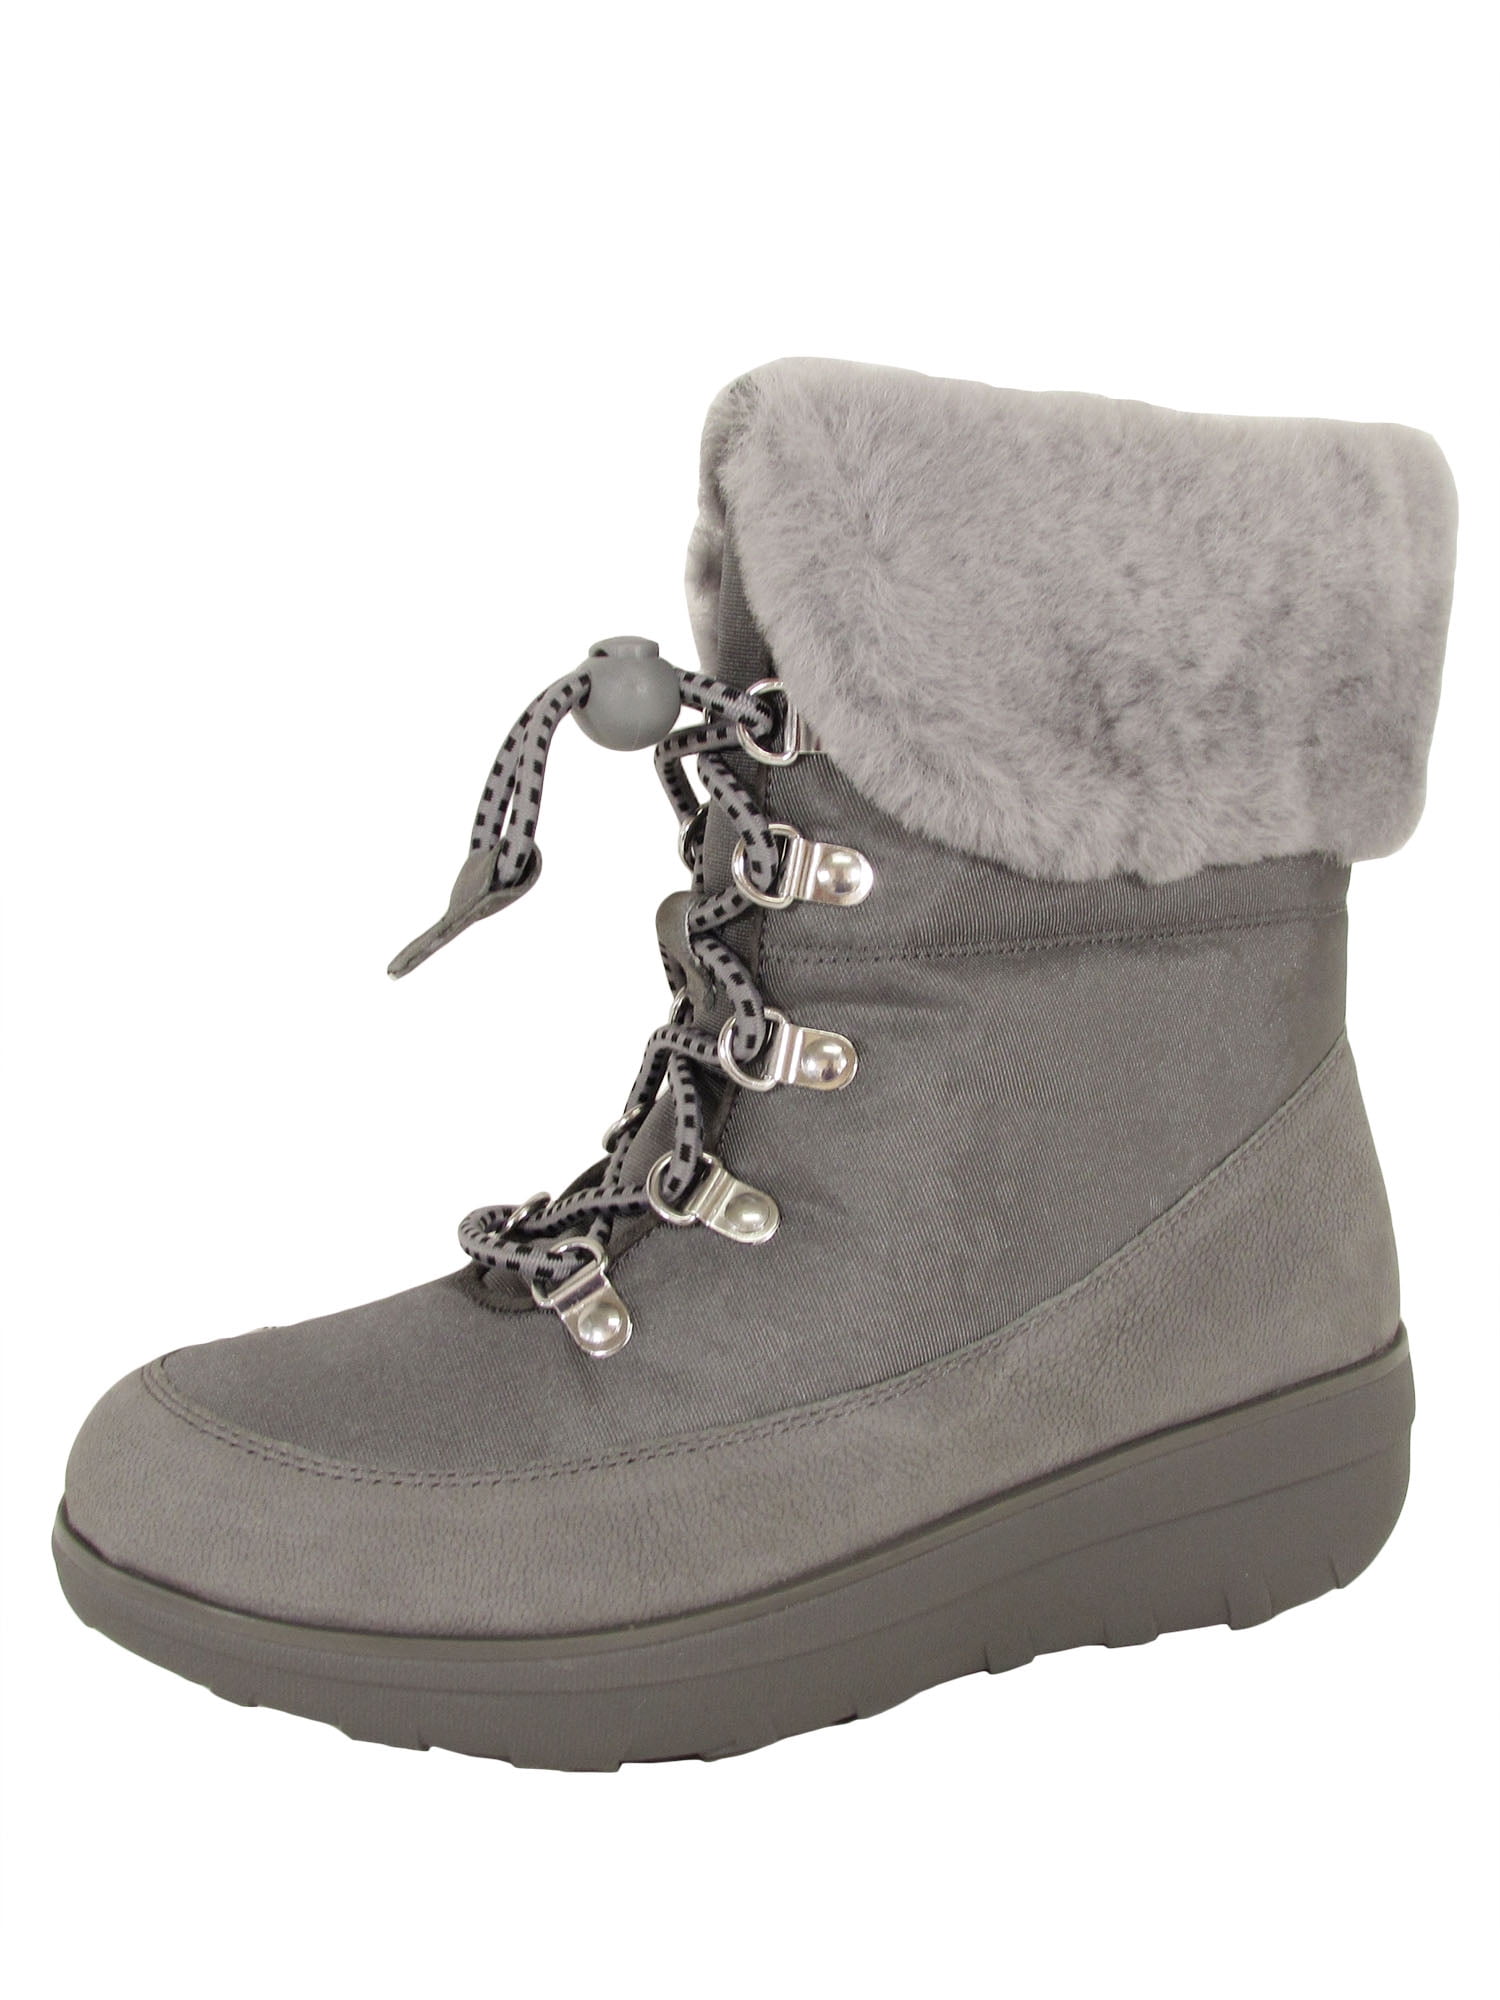 FitFlop - Fitflop Womens Holly Shearling Lace Up Winter Boot Shoes ...